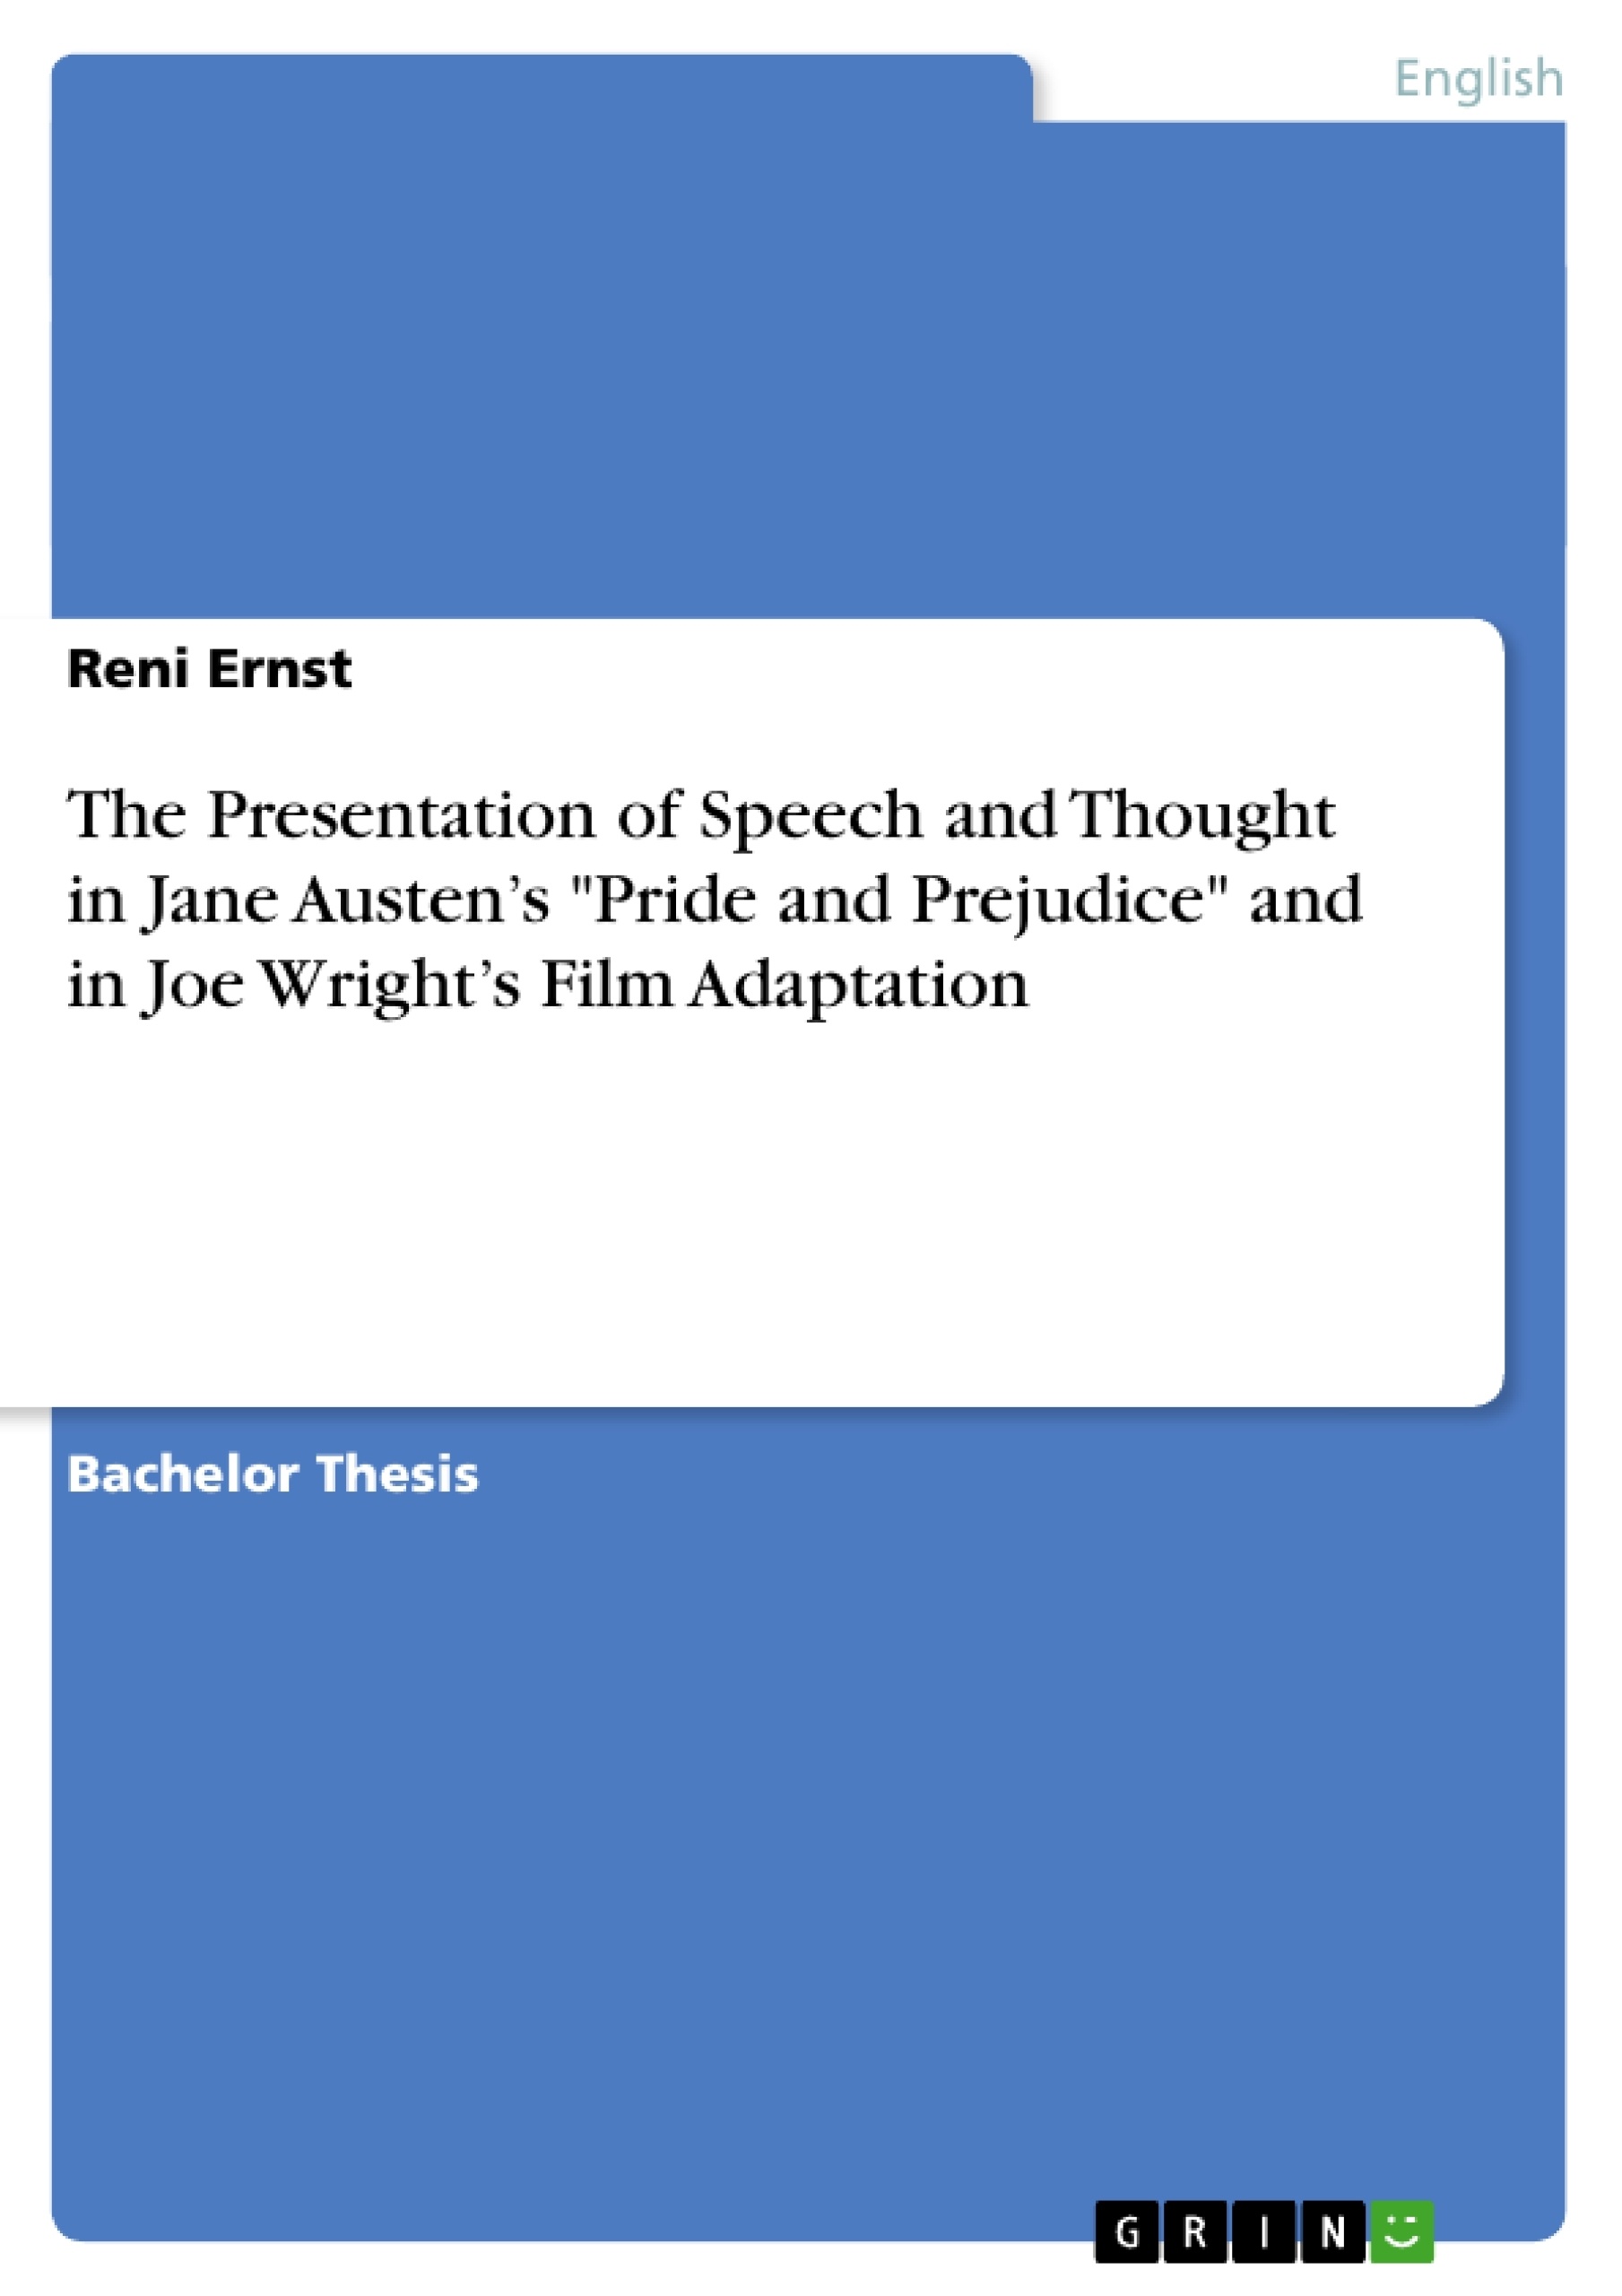 Titre: The Presentation of Speech and Thought in Jane Austen’s "Pride and Prejudice" and in Joe Wright’s Film Adaptation